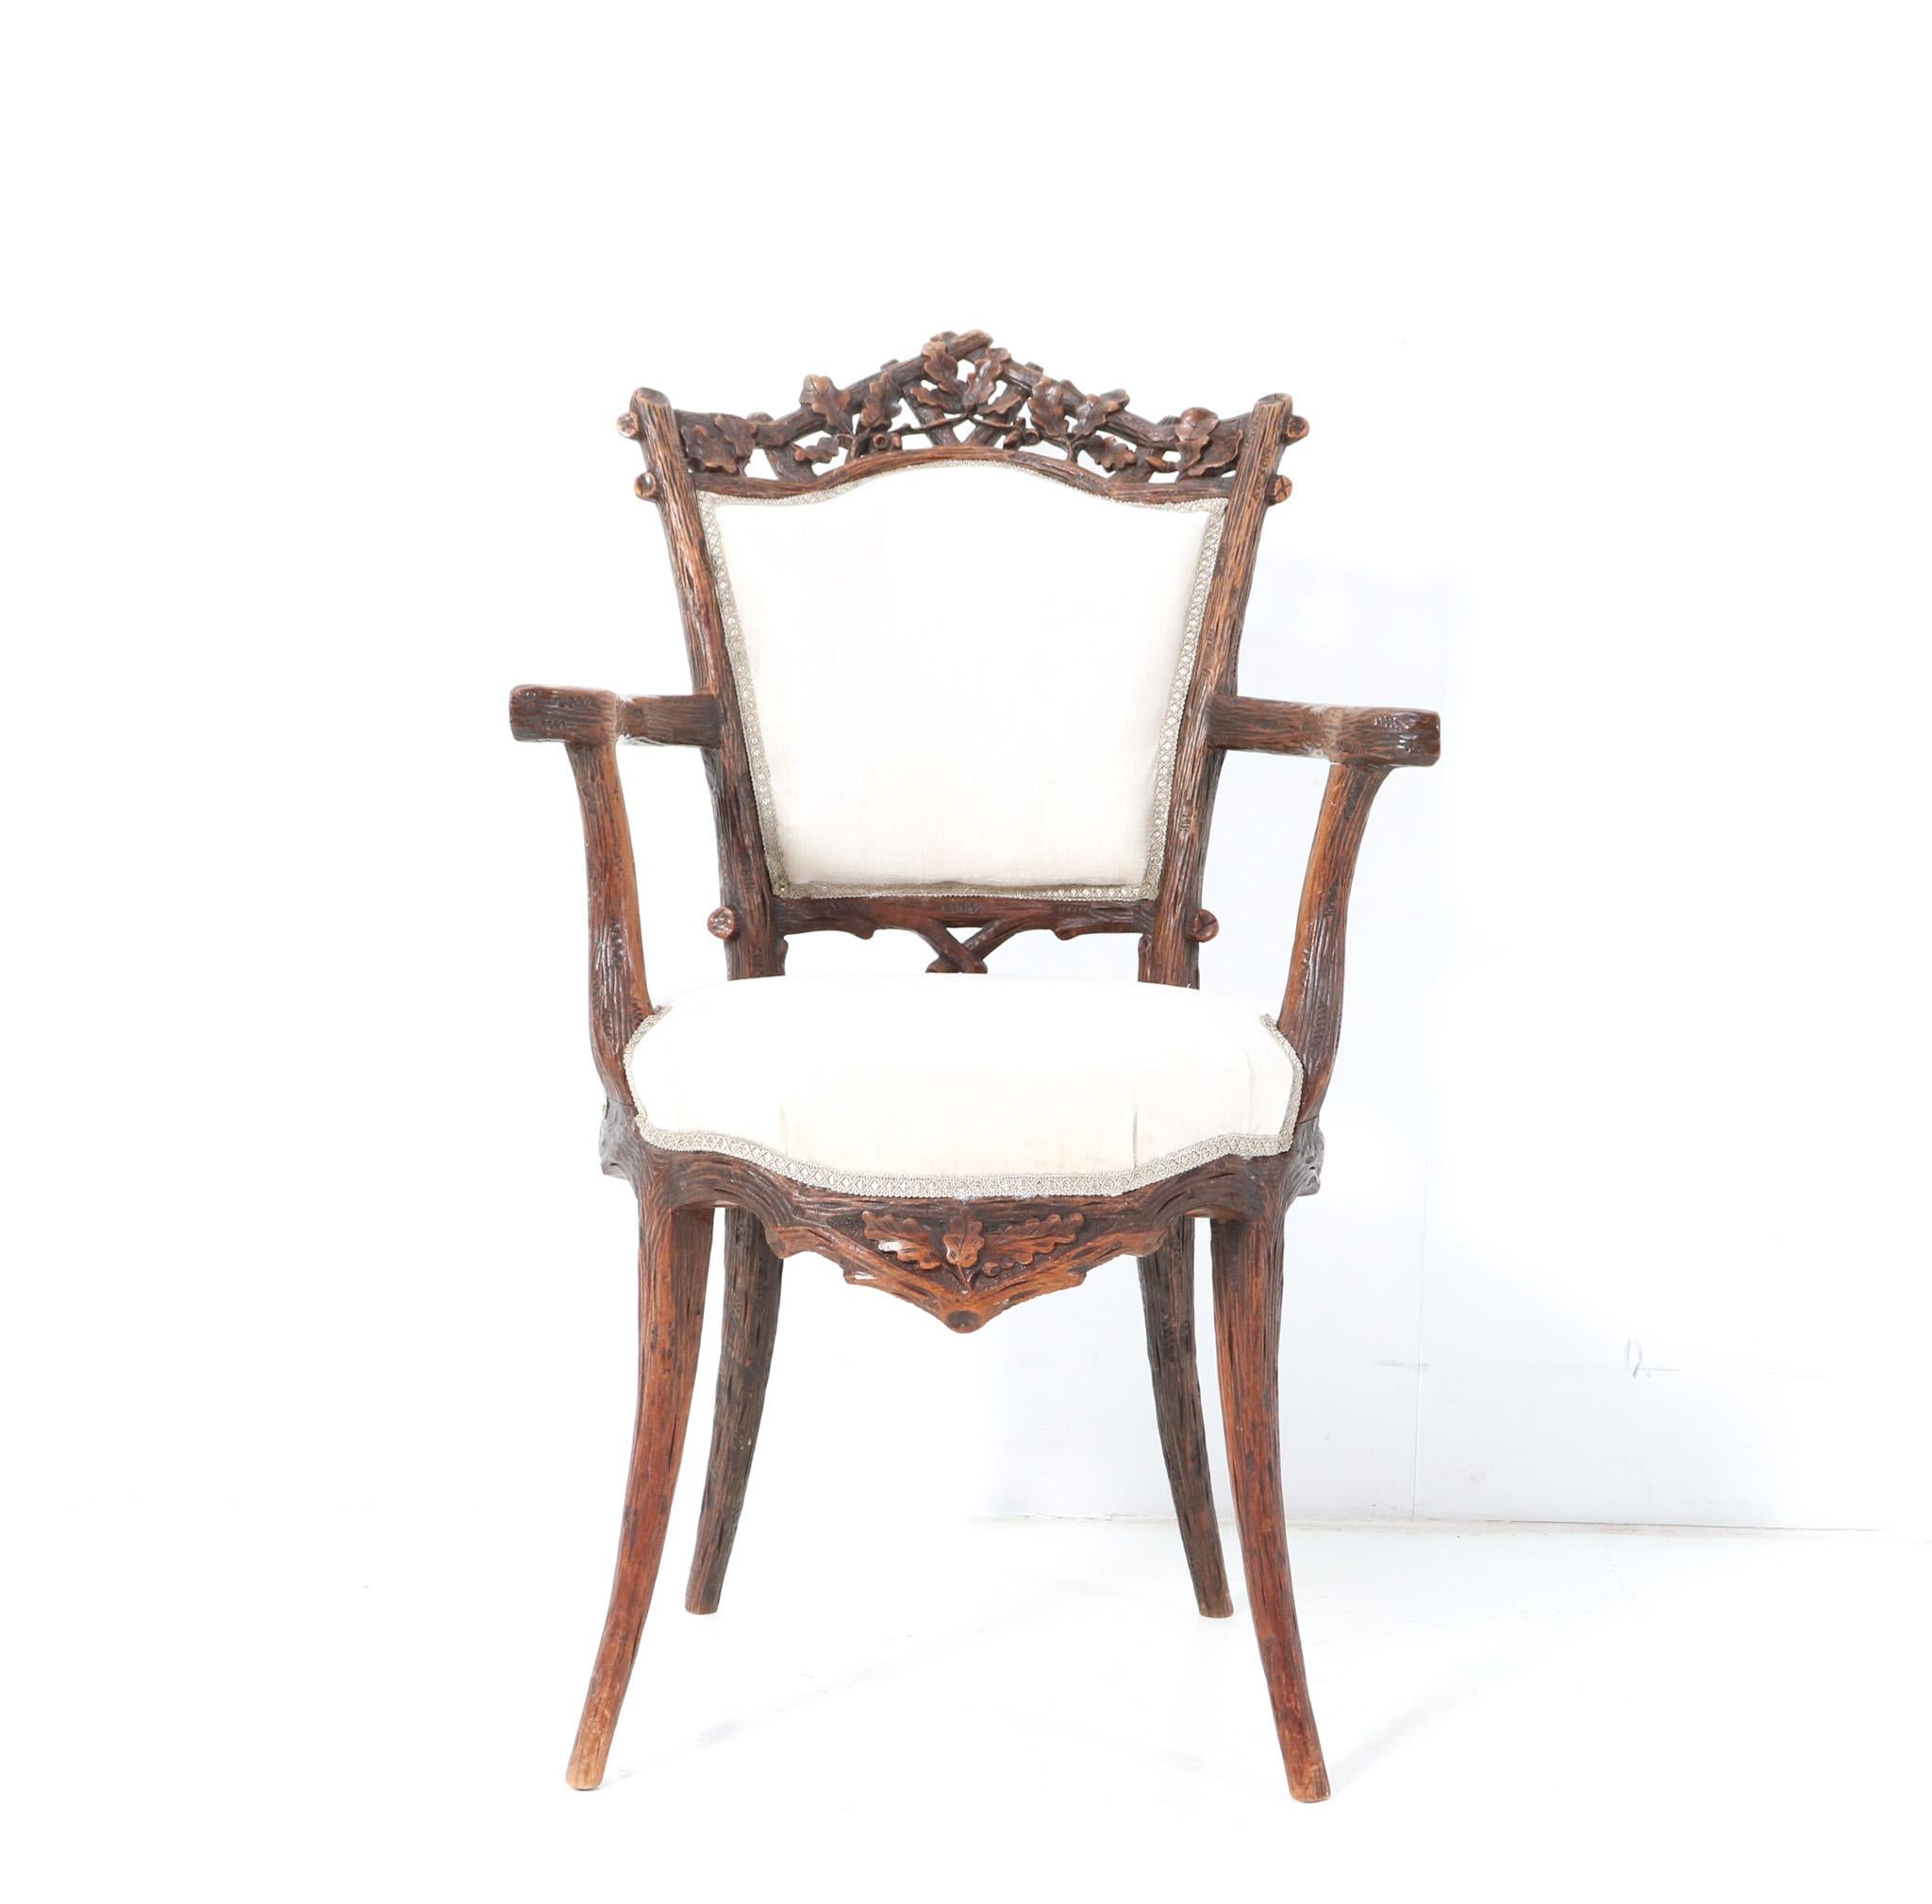 Magnificent and ultra rare Black Forest armchair. Design by Matthijs Horrix for the famous Dutch cabinet makers Horrix Den Haag. Striking Dutch design from the 1880s. Solid hand-carved walnut base and re-upholstered with a quality white fabric. This